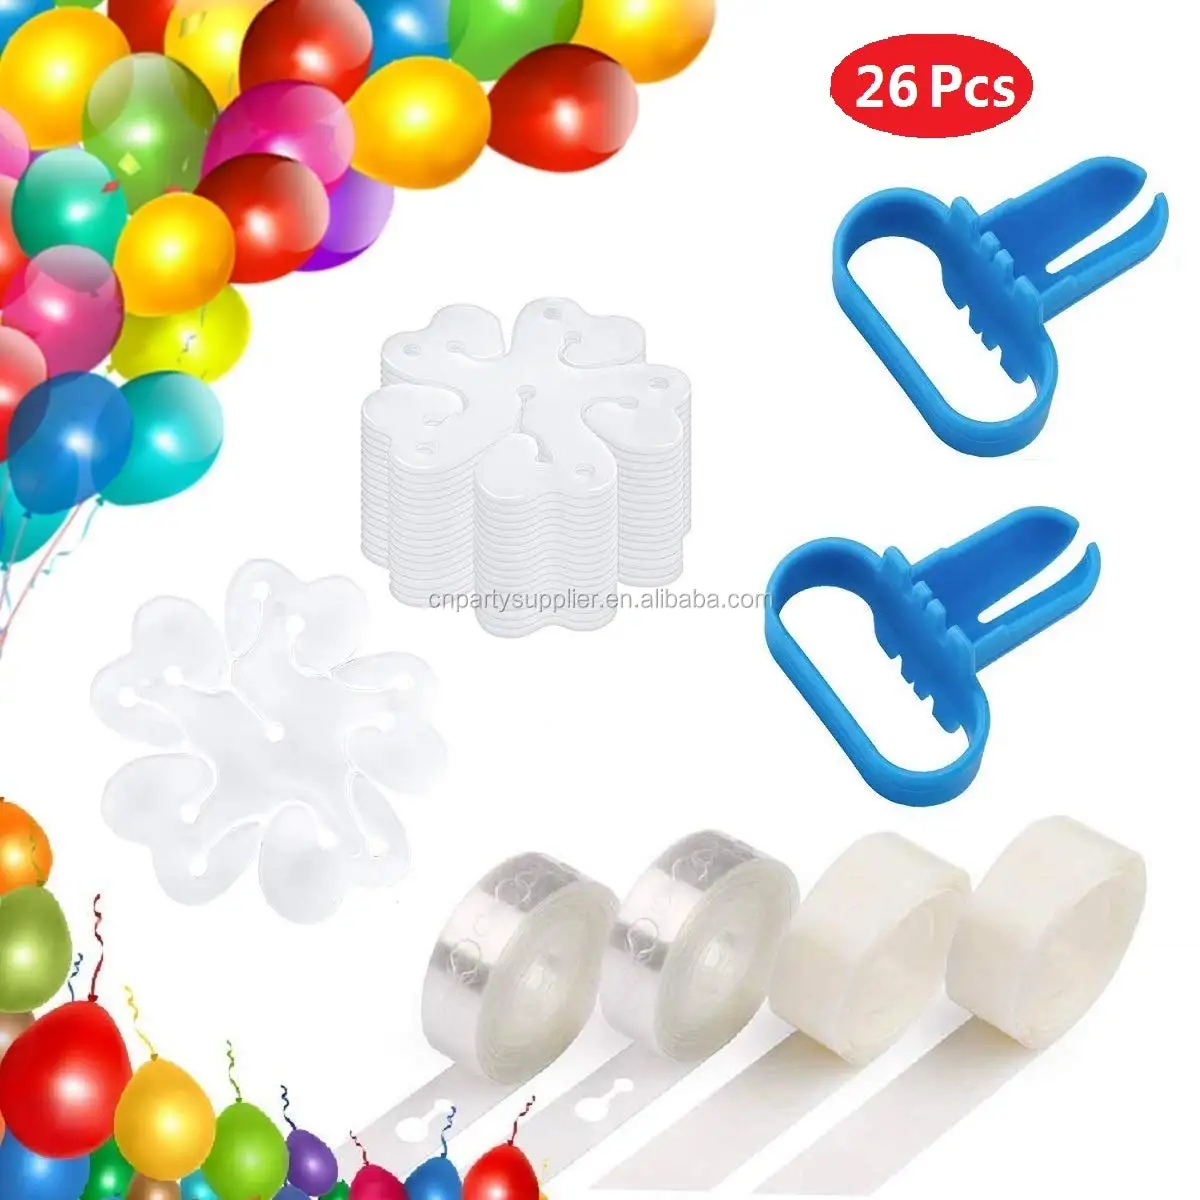 Aijoso Balloon Arch Kit 200 Dot Glue 20 Flower Clip for Birthday Wedding Party Decorations Party Supplies Balloon Garland Strip Kit with 32Ft Balloon Arch Strip 3 Pcs Tying Tool